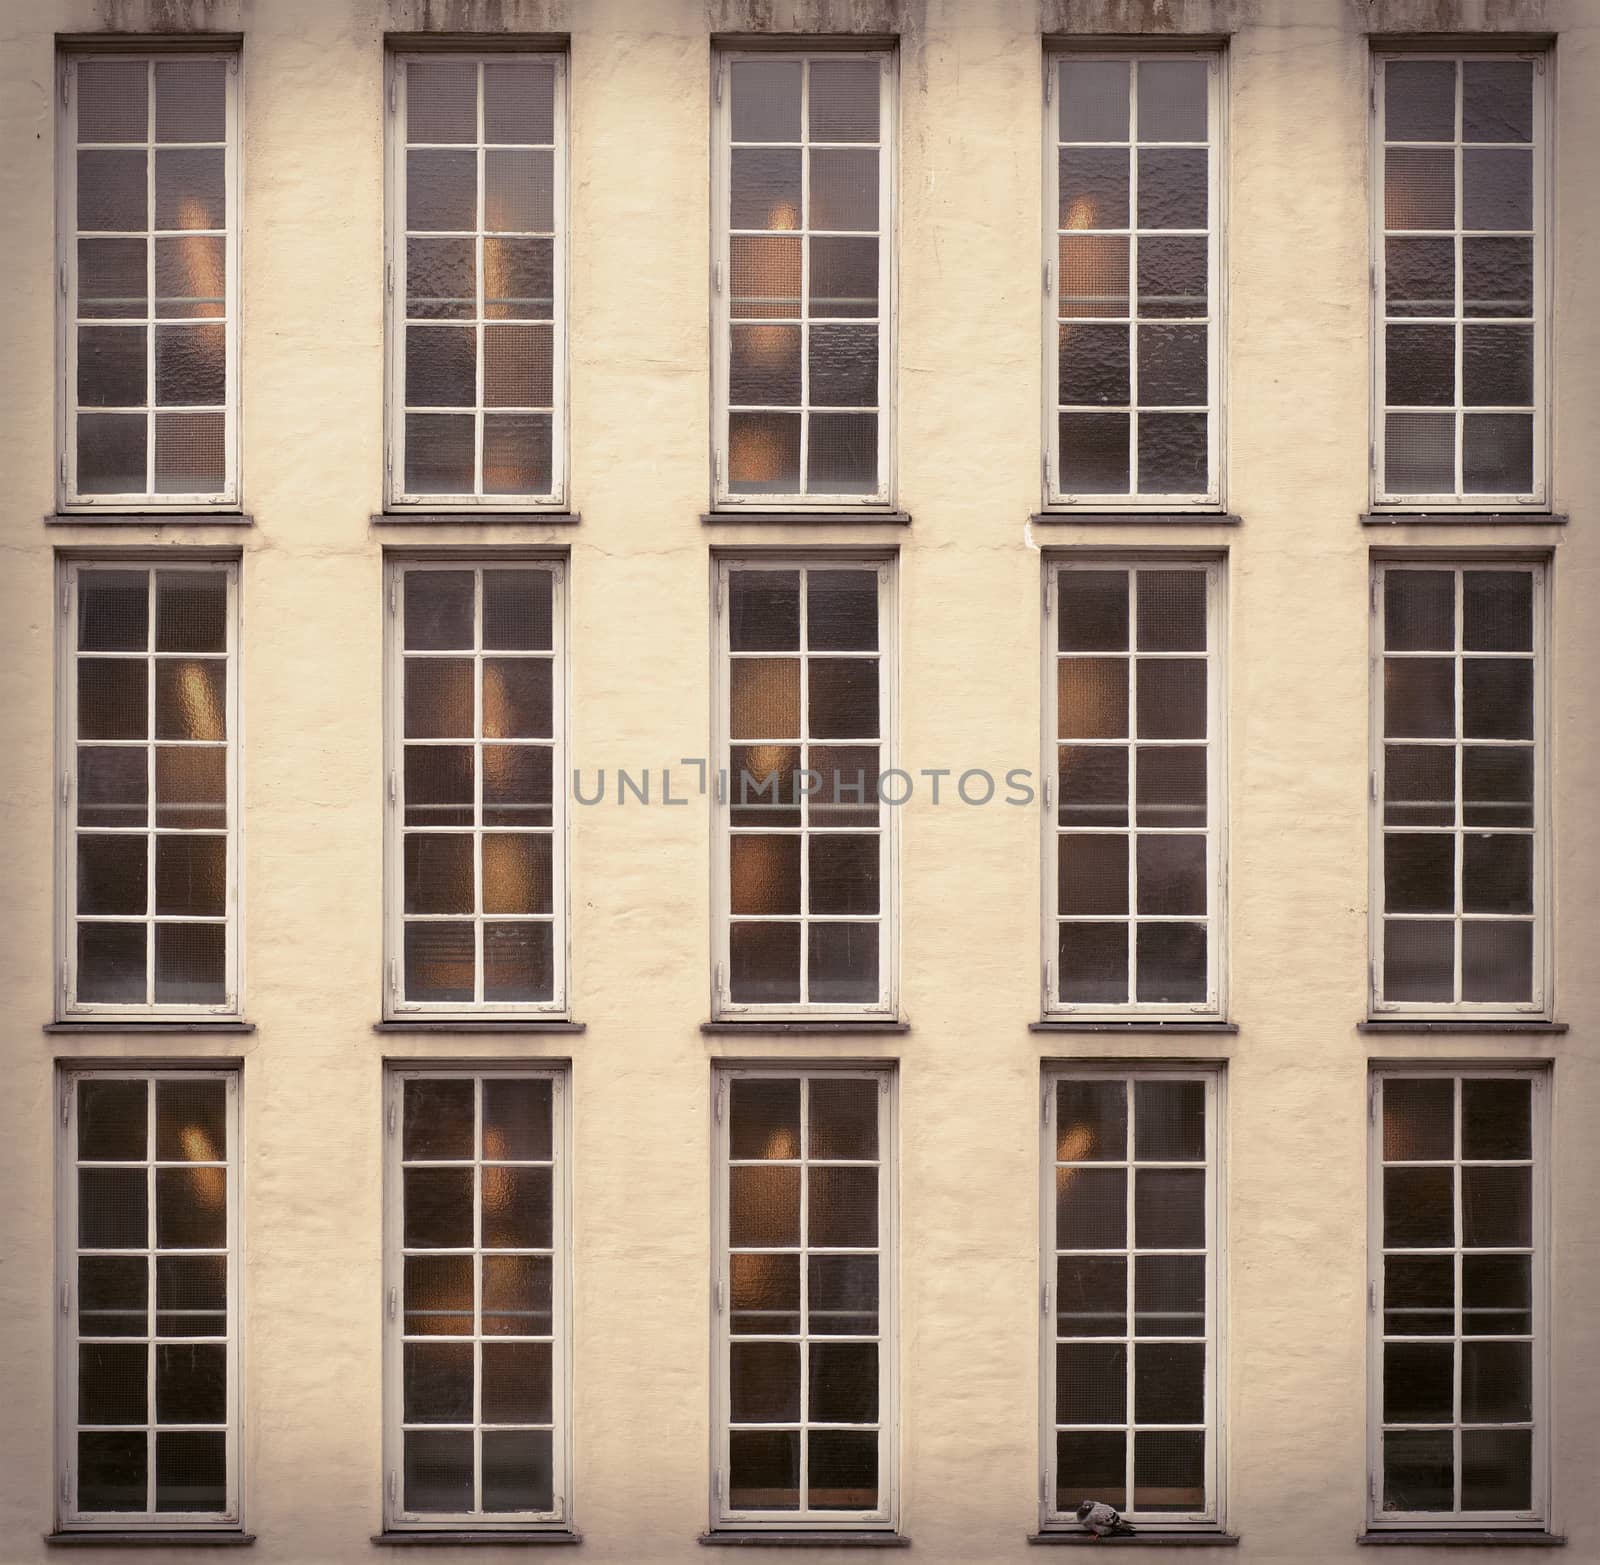 building with lots of windows, pigeon sitting on the windowsill, grunge wall background